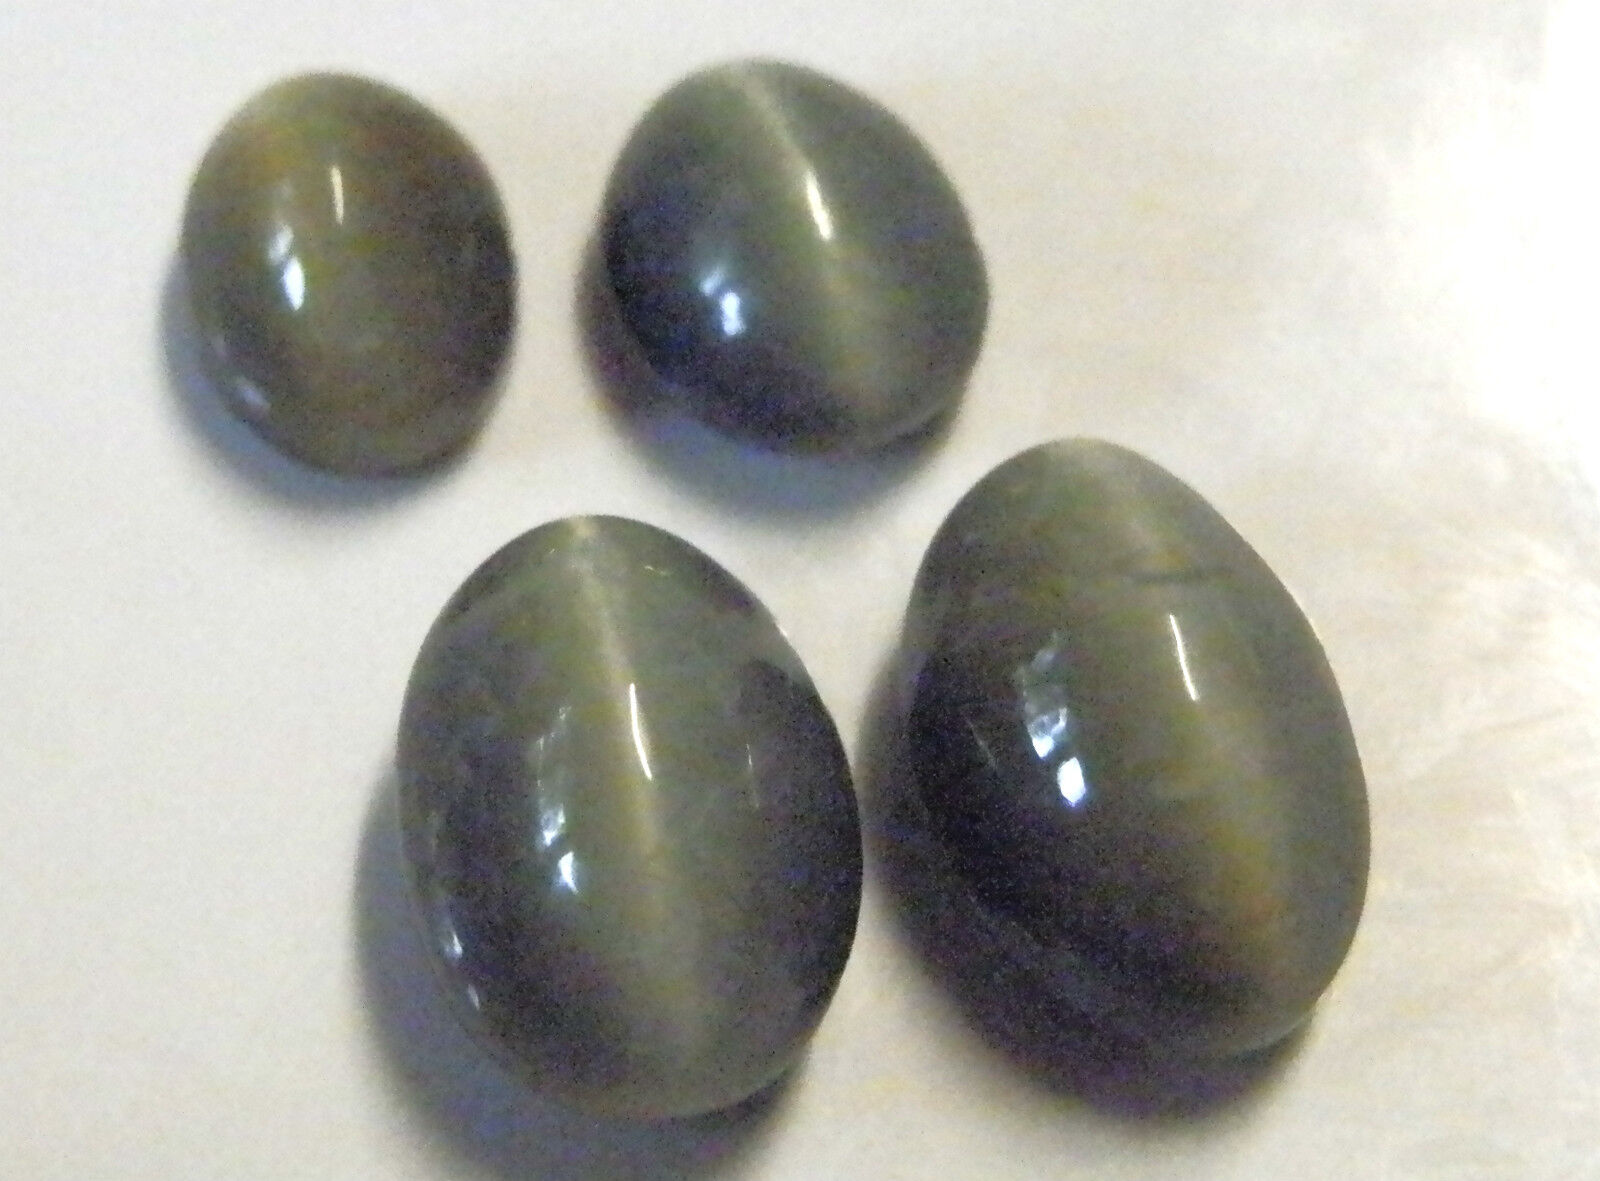 Natural earth-mined  cats-eye apatite specimens...21 carat